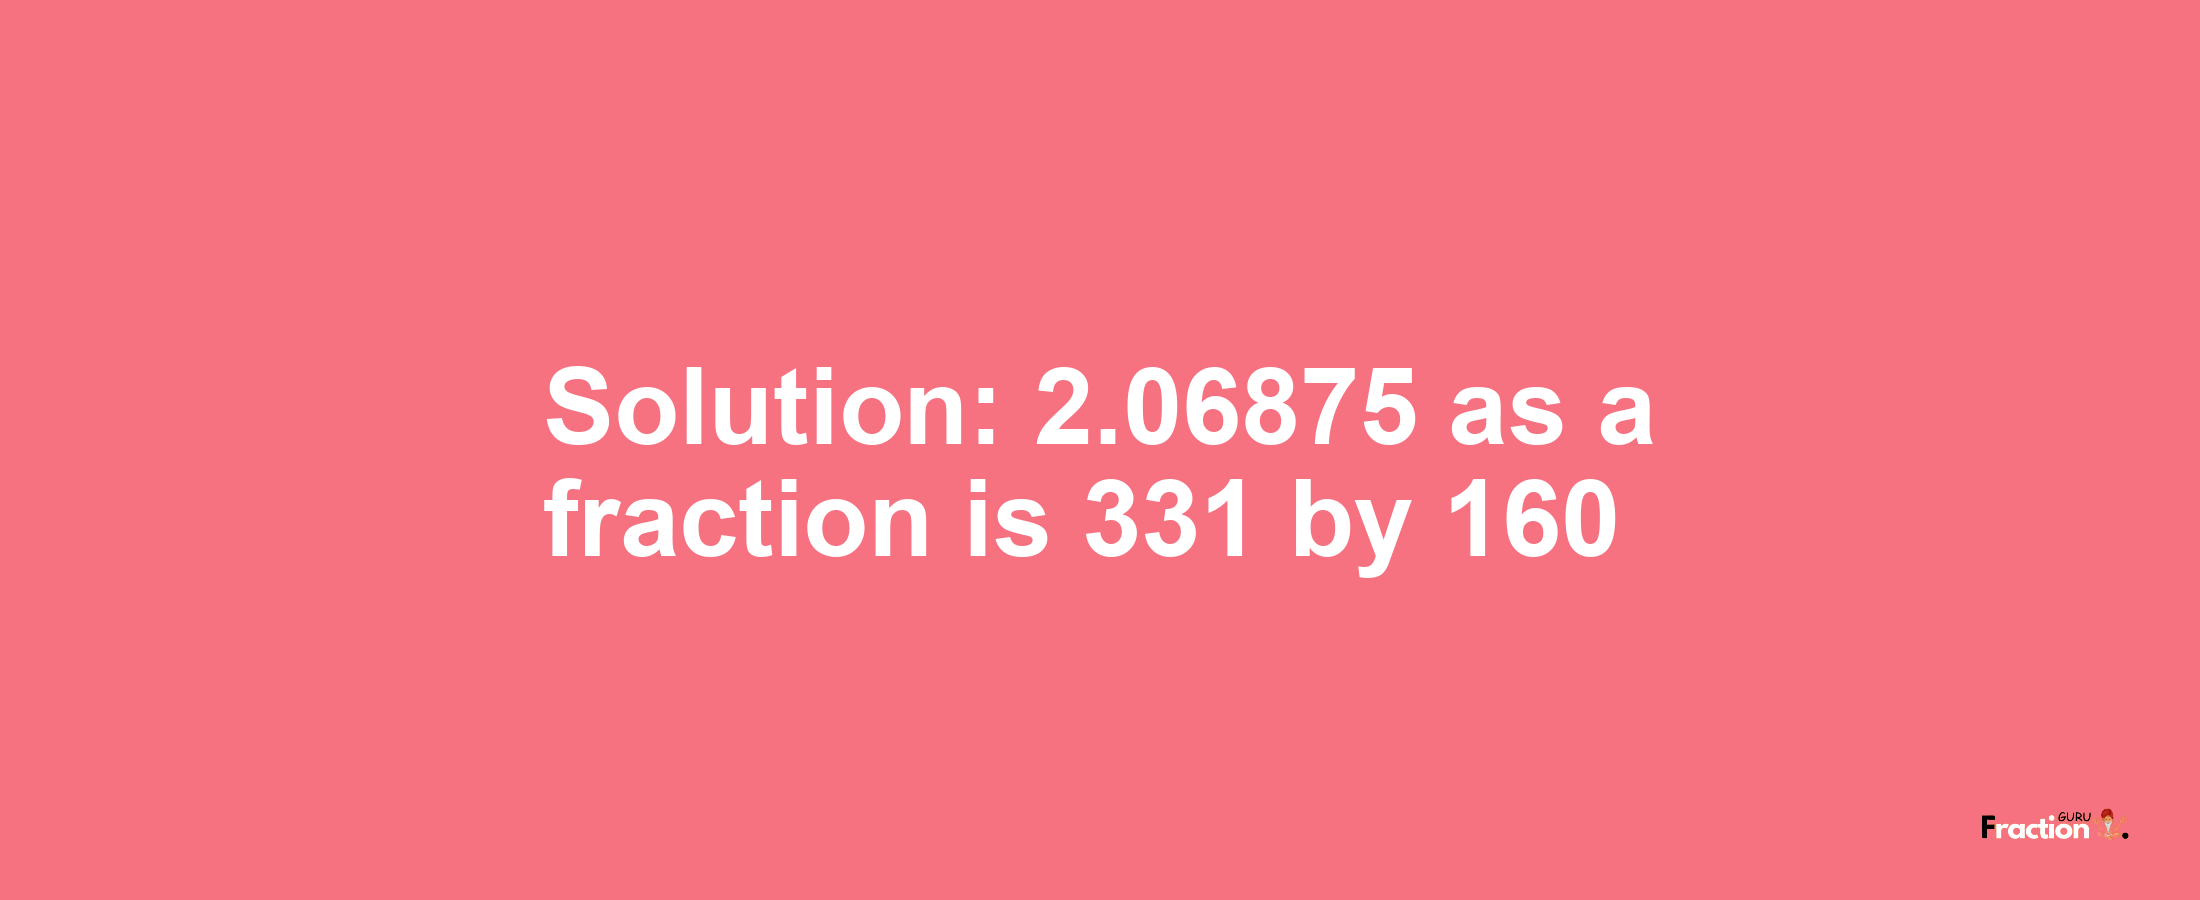 Solution:2.06875 as a fraction is 331/160